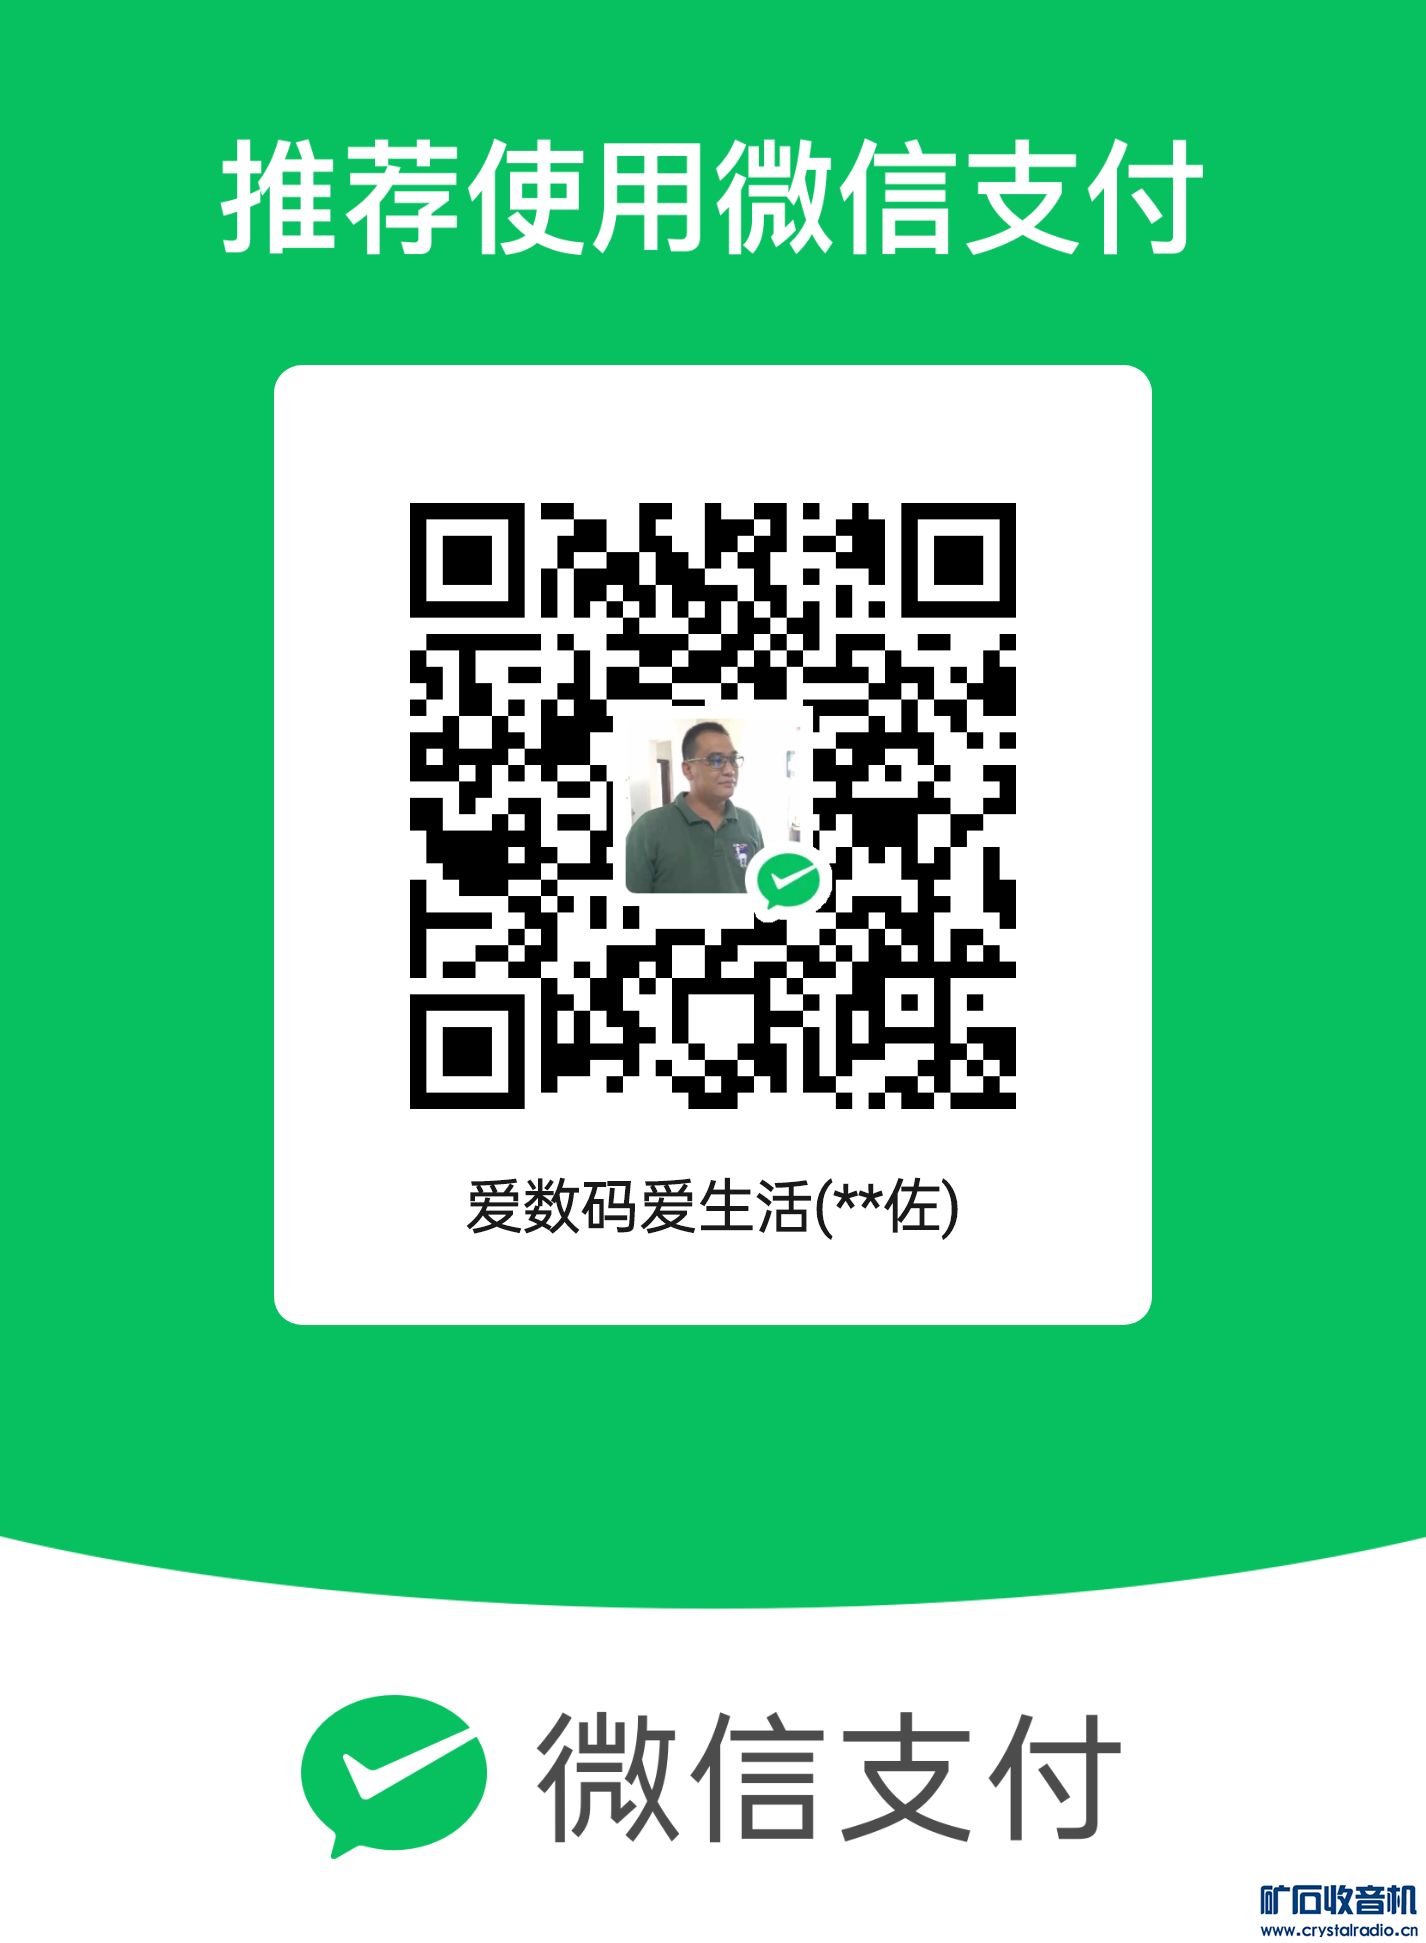 mm_facetoface_collect_qrcode_1710478731295.png